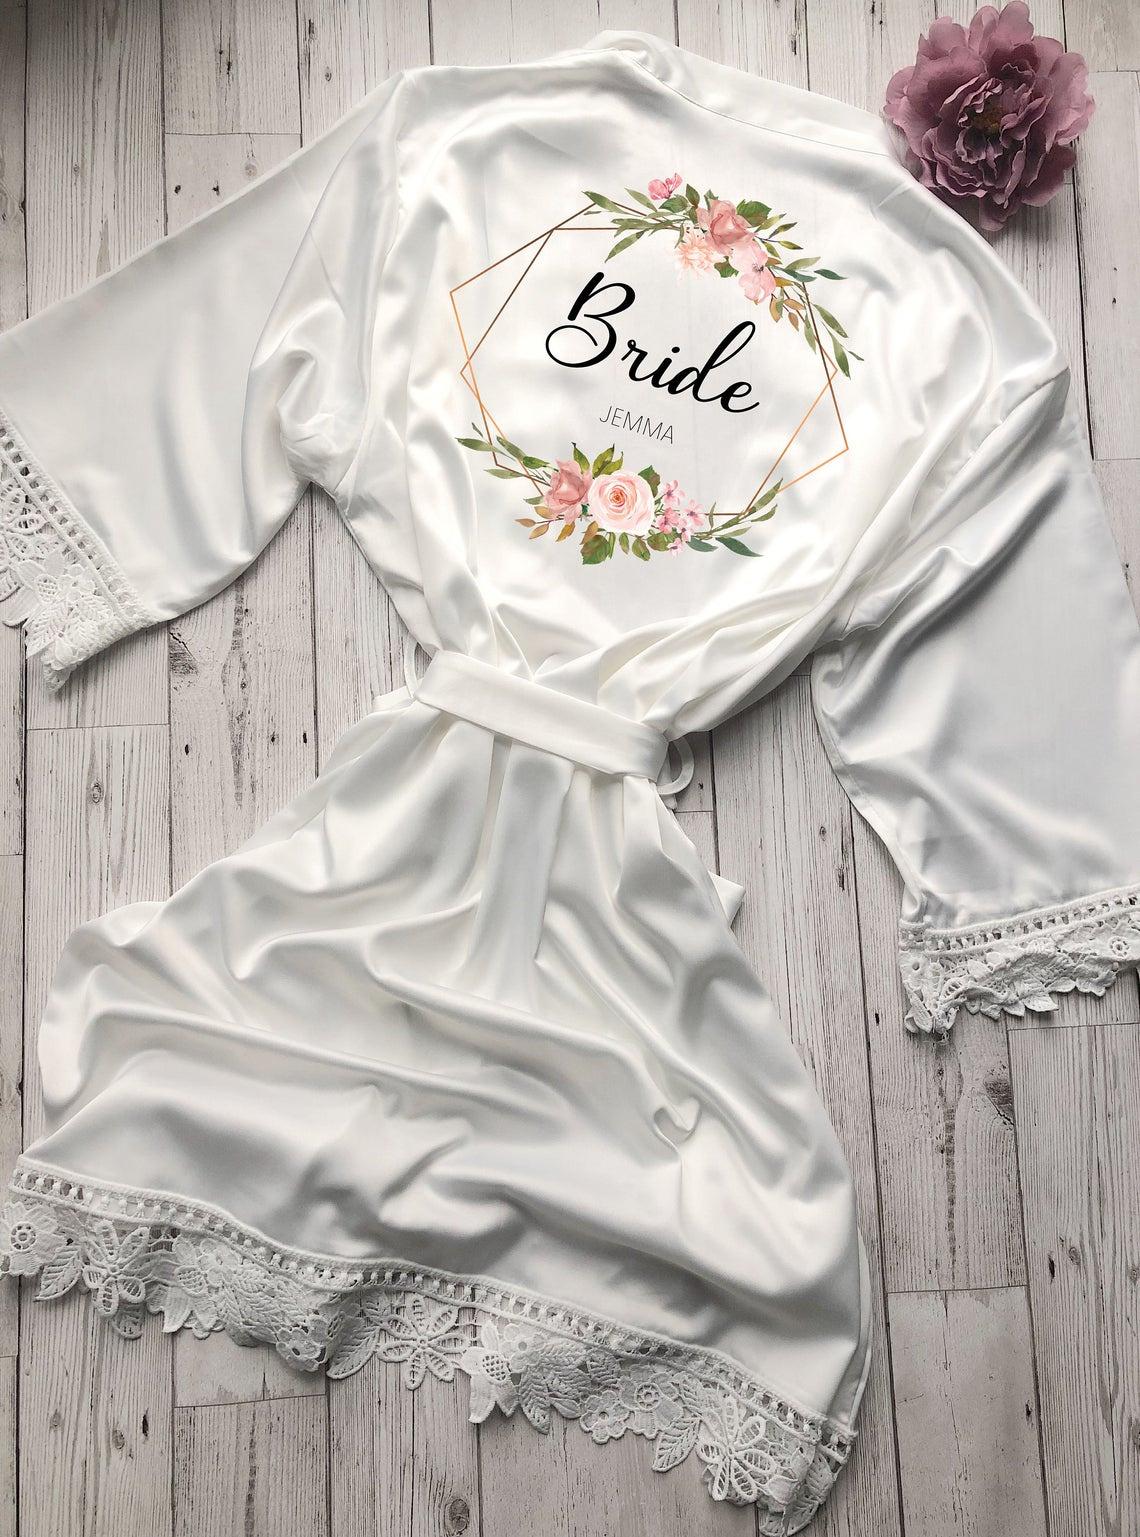 Wedding Day Dressing Gown Bride to BeBridesmaid PERSONALISED DRESSING GOWN 